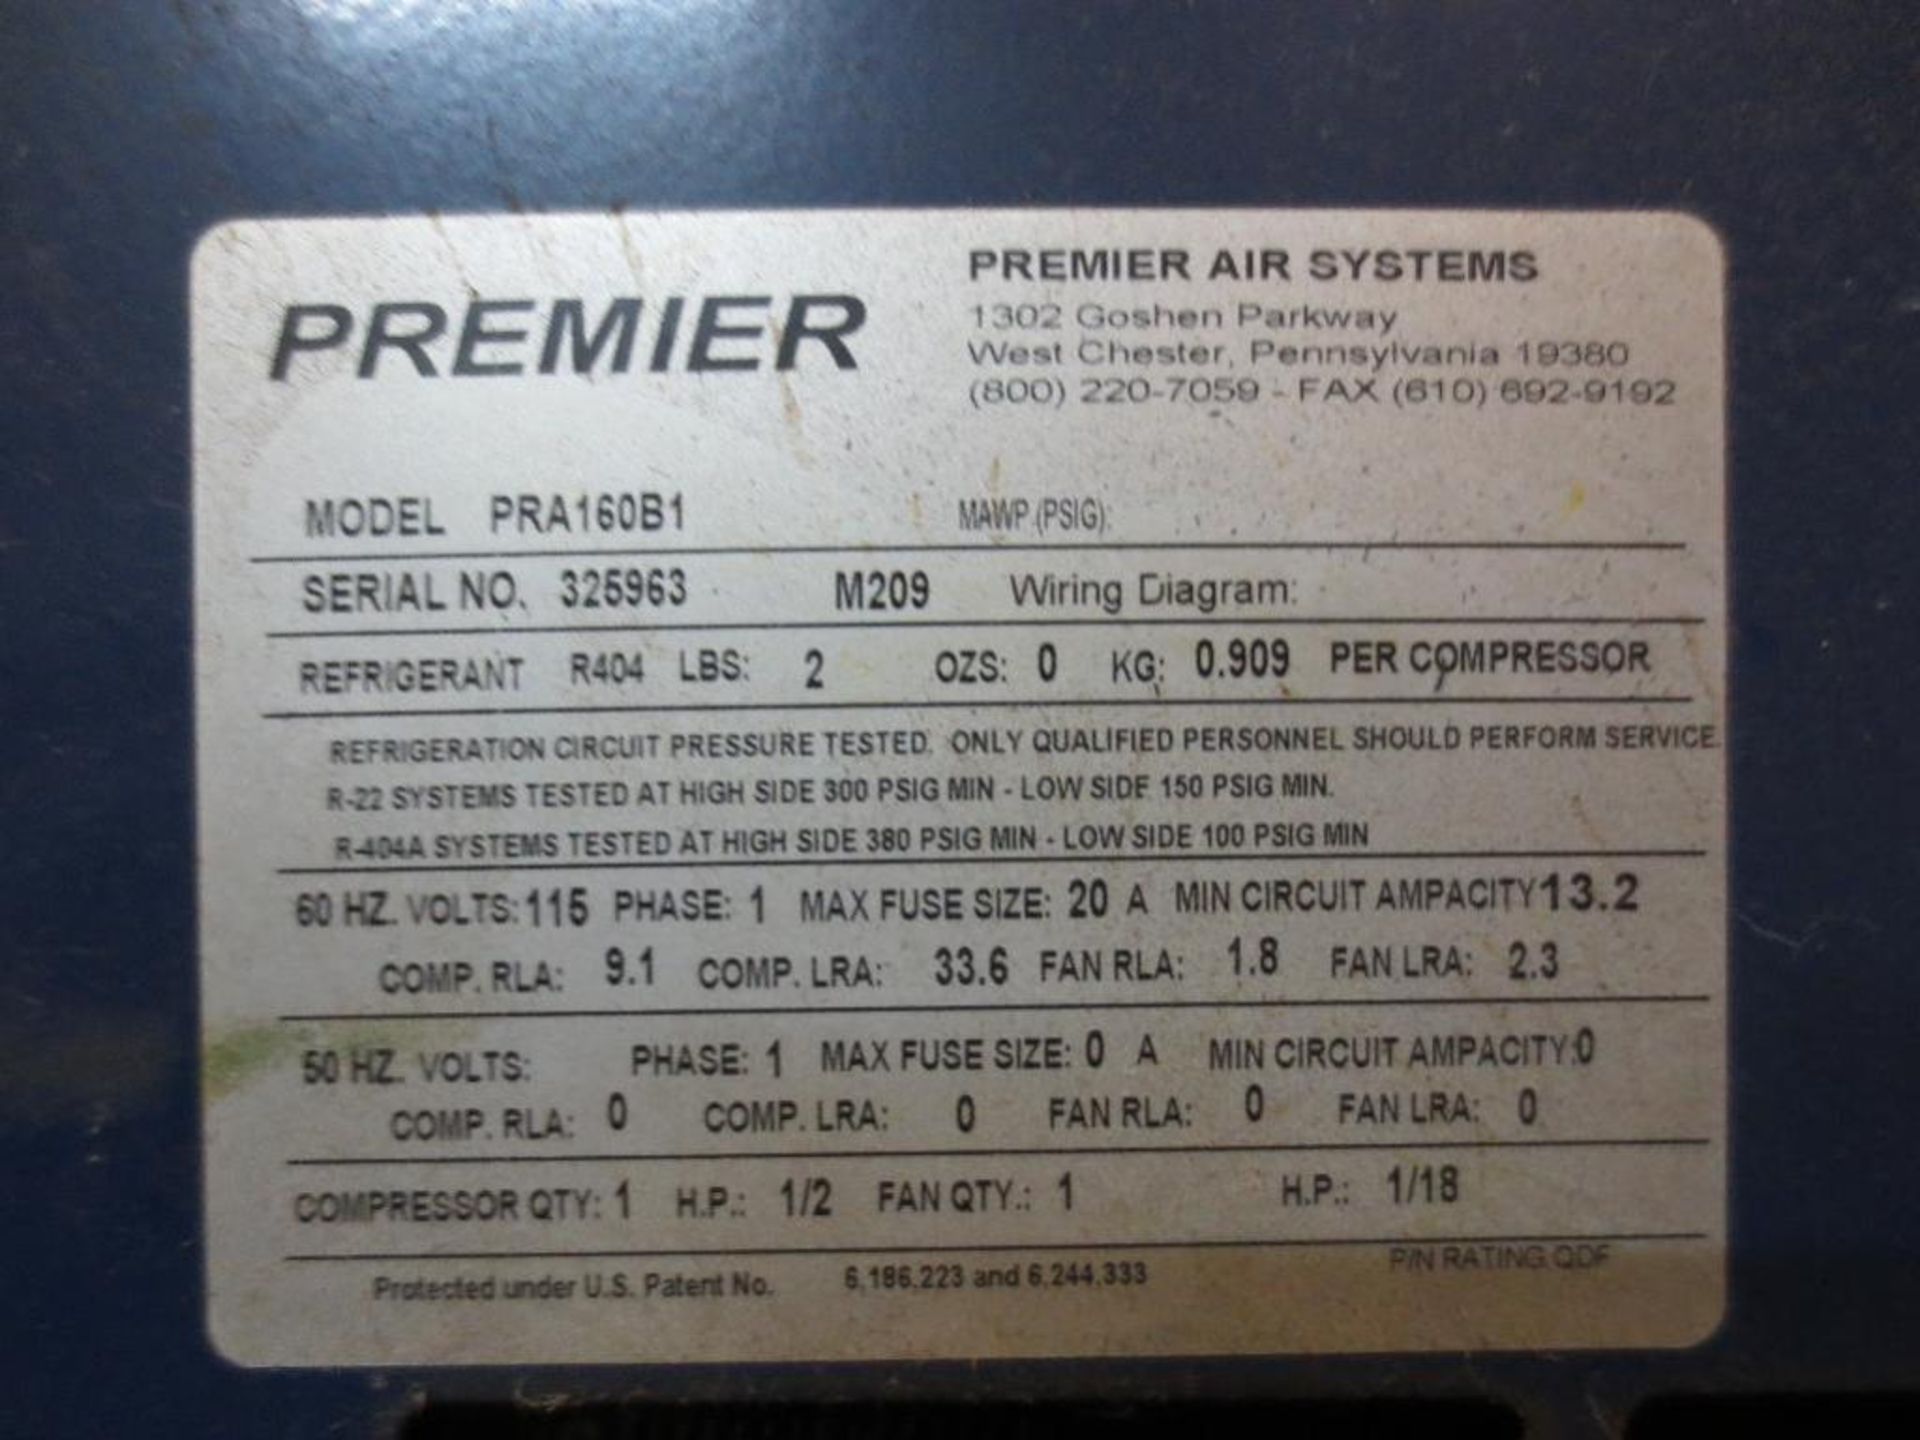 Comp Air L22-9 Rotary Screw air compressor (2006) and Premier air dryer S# 325963 - Image 5 of 6